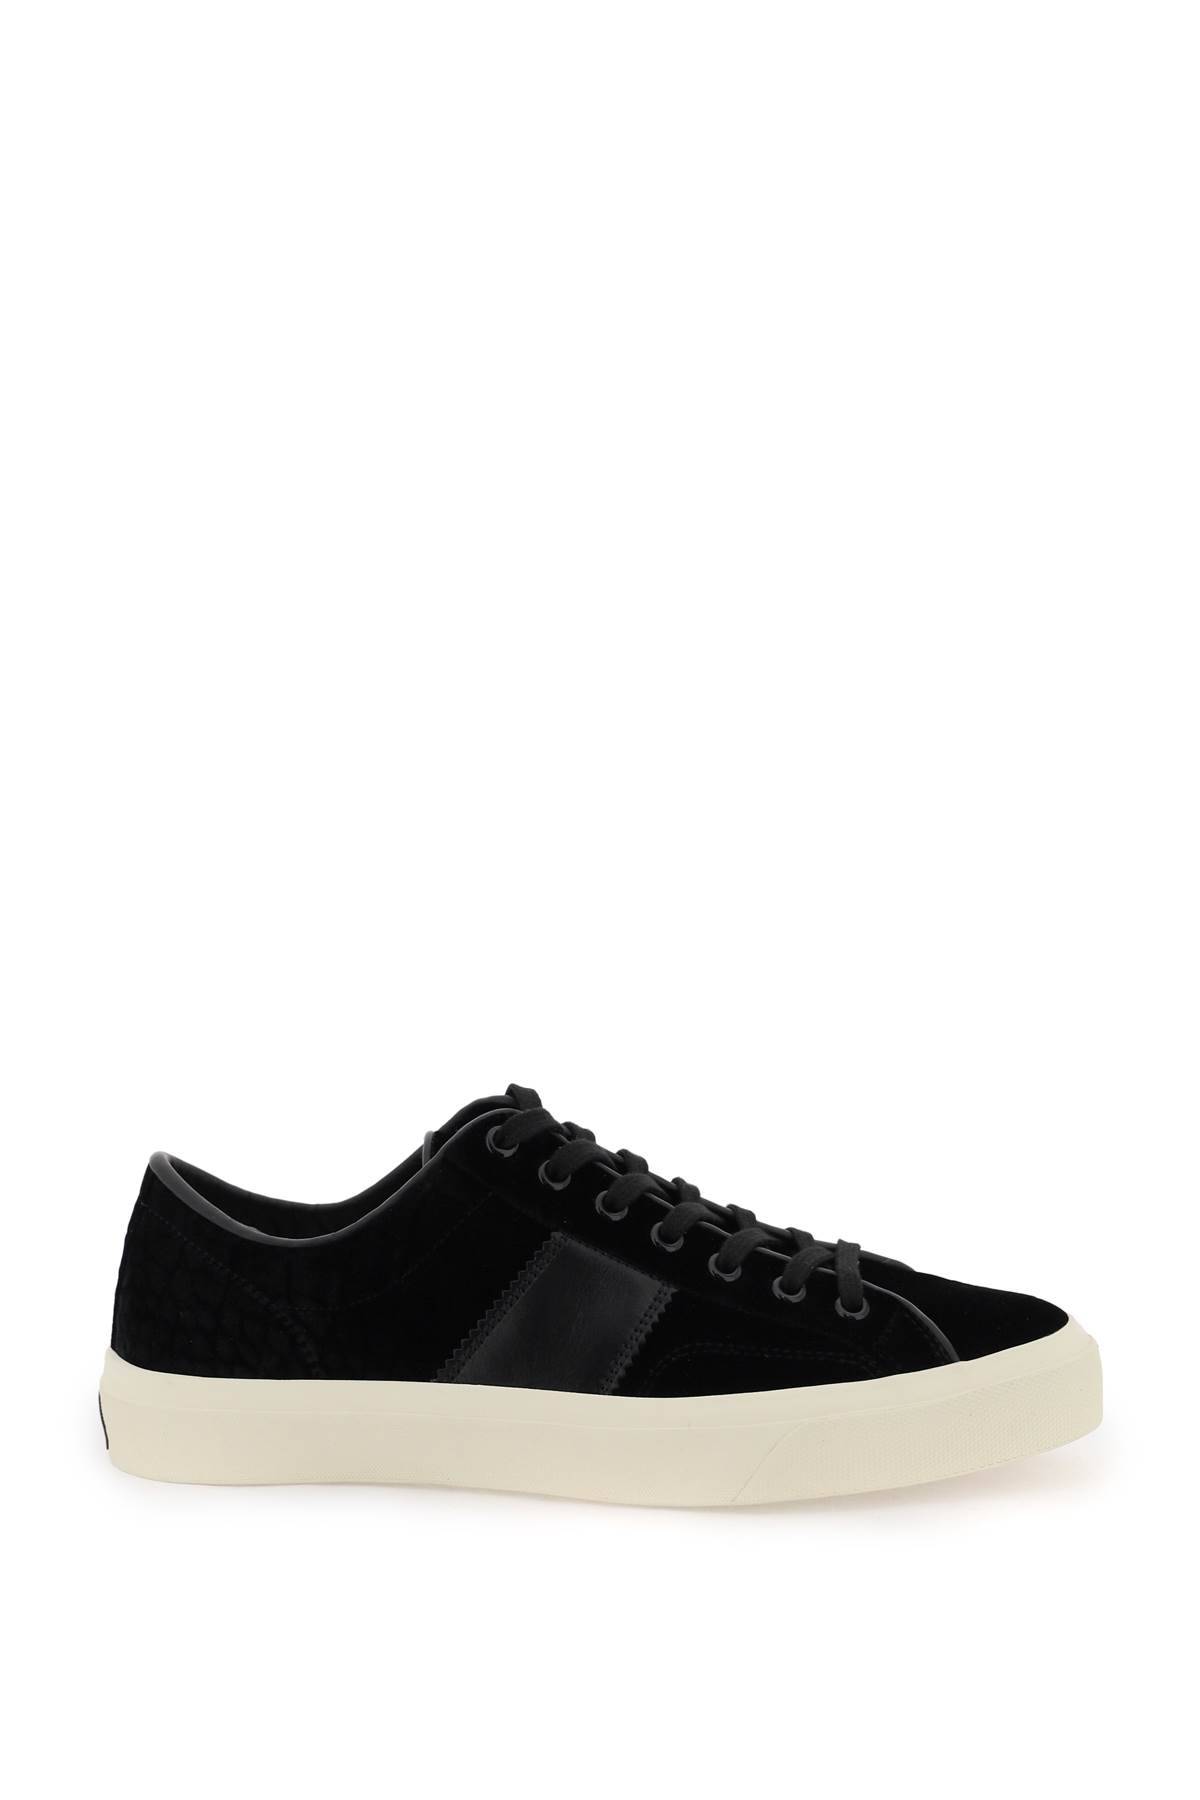 TOM FORD cambridge sneakers